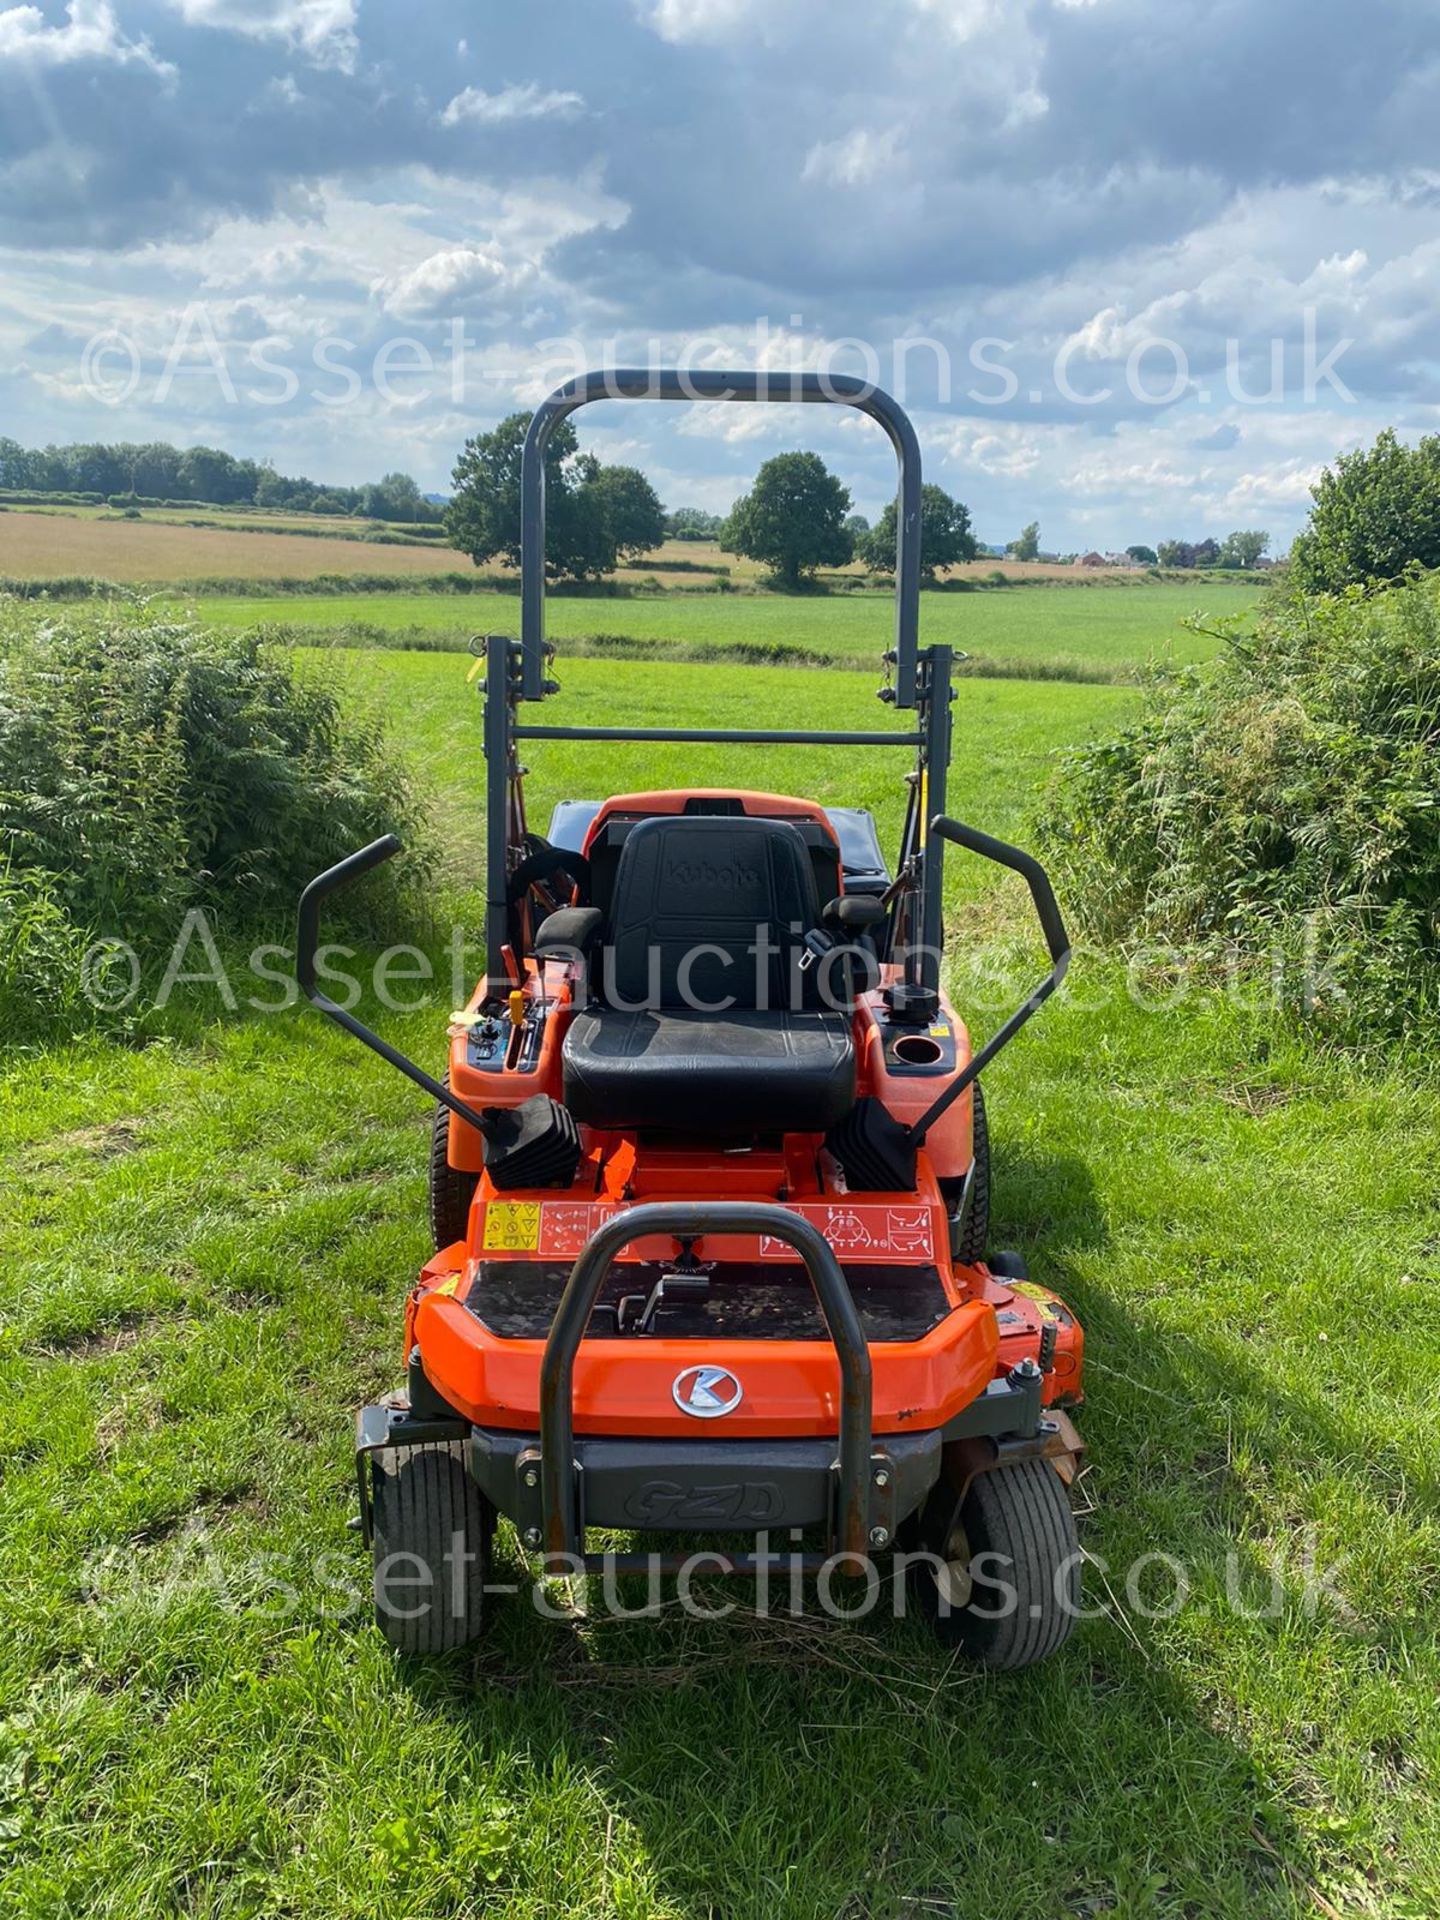 2015 KUBOTA GZD21 HIGH TIP ZERO TURN MOWER, SOLD NEW MID 2017, SHOWING A LOW 203 HOURS *PLUS VAT* - Image 9 of 16